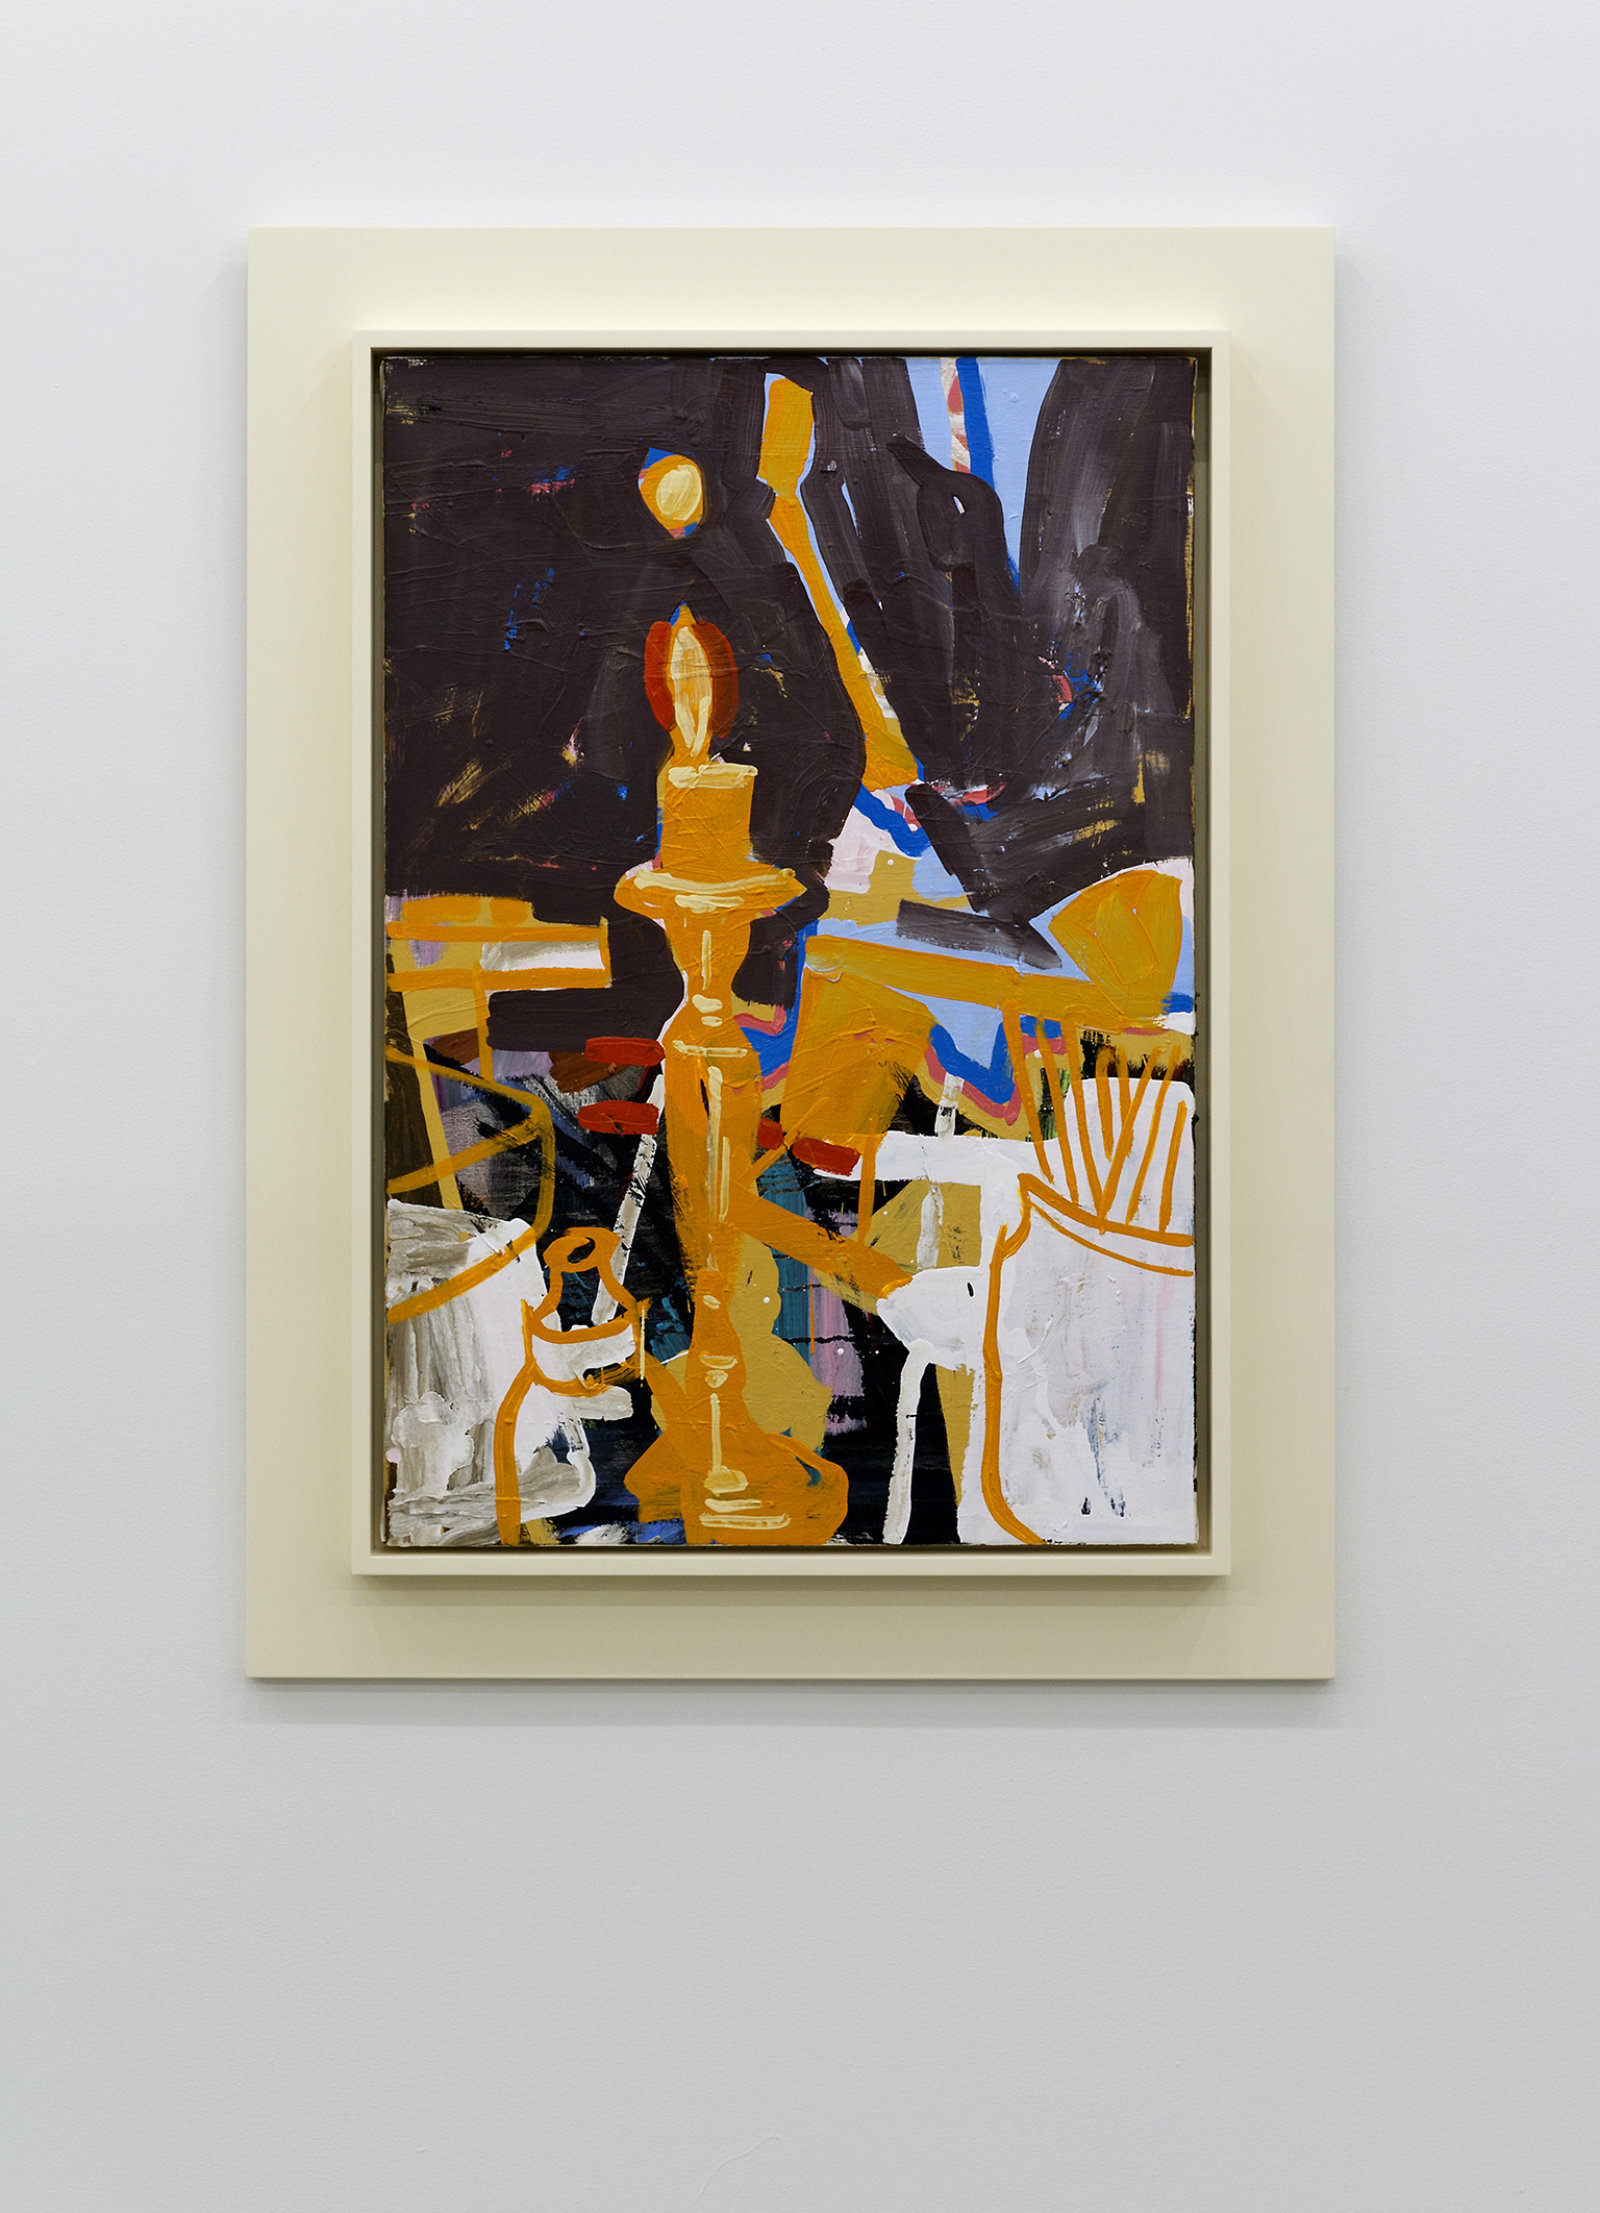 Damian Moppett, Orange Candle, 2010, oil and enamel on linen and wood frame, 40 x 30 in. (100 x 76 cm)